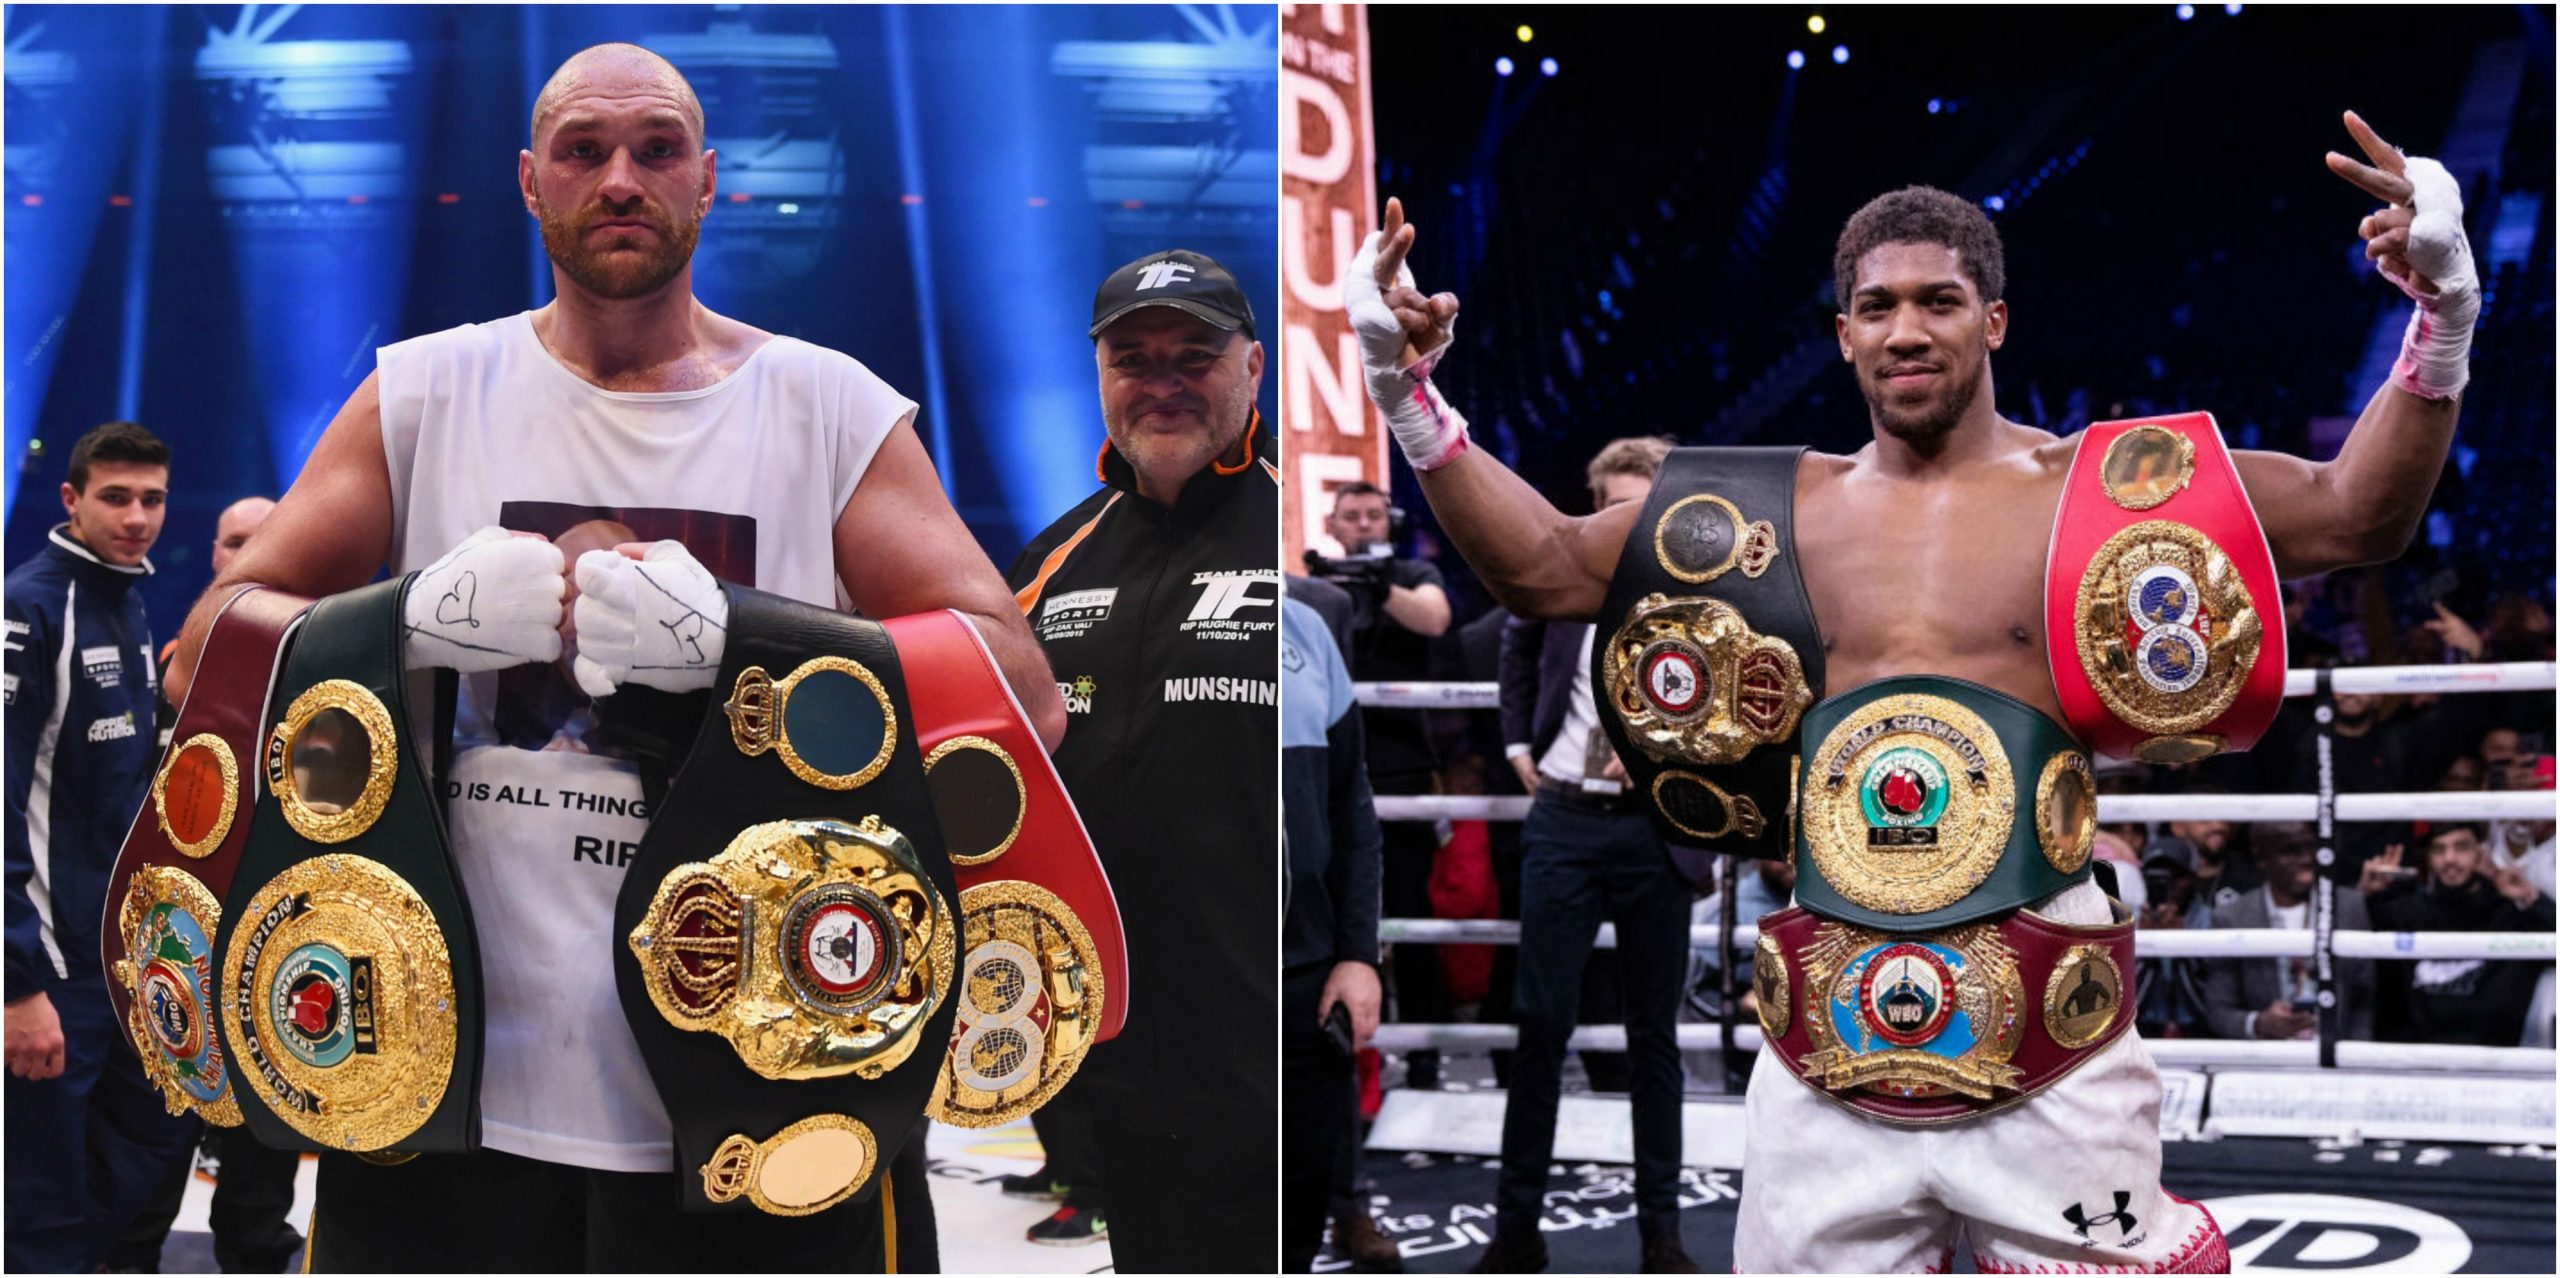 Promoter Eddie Hearn claims Tyson Fury has 'laughable' stats compared to Anthony Joshua - THE SPORTS ROOM